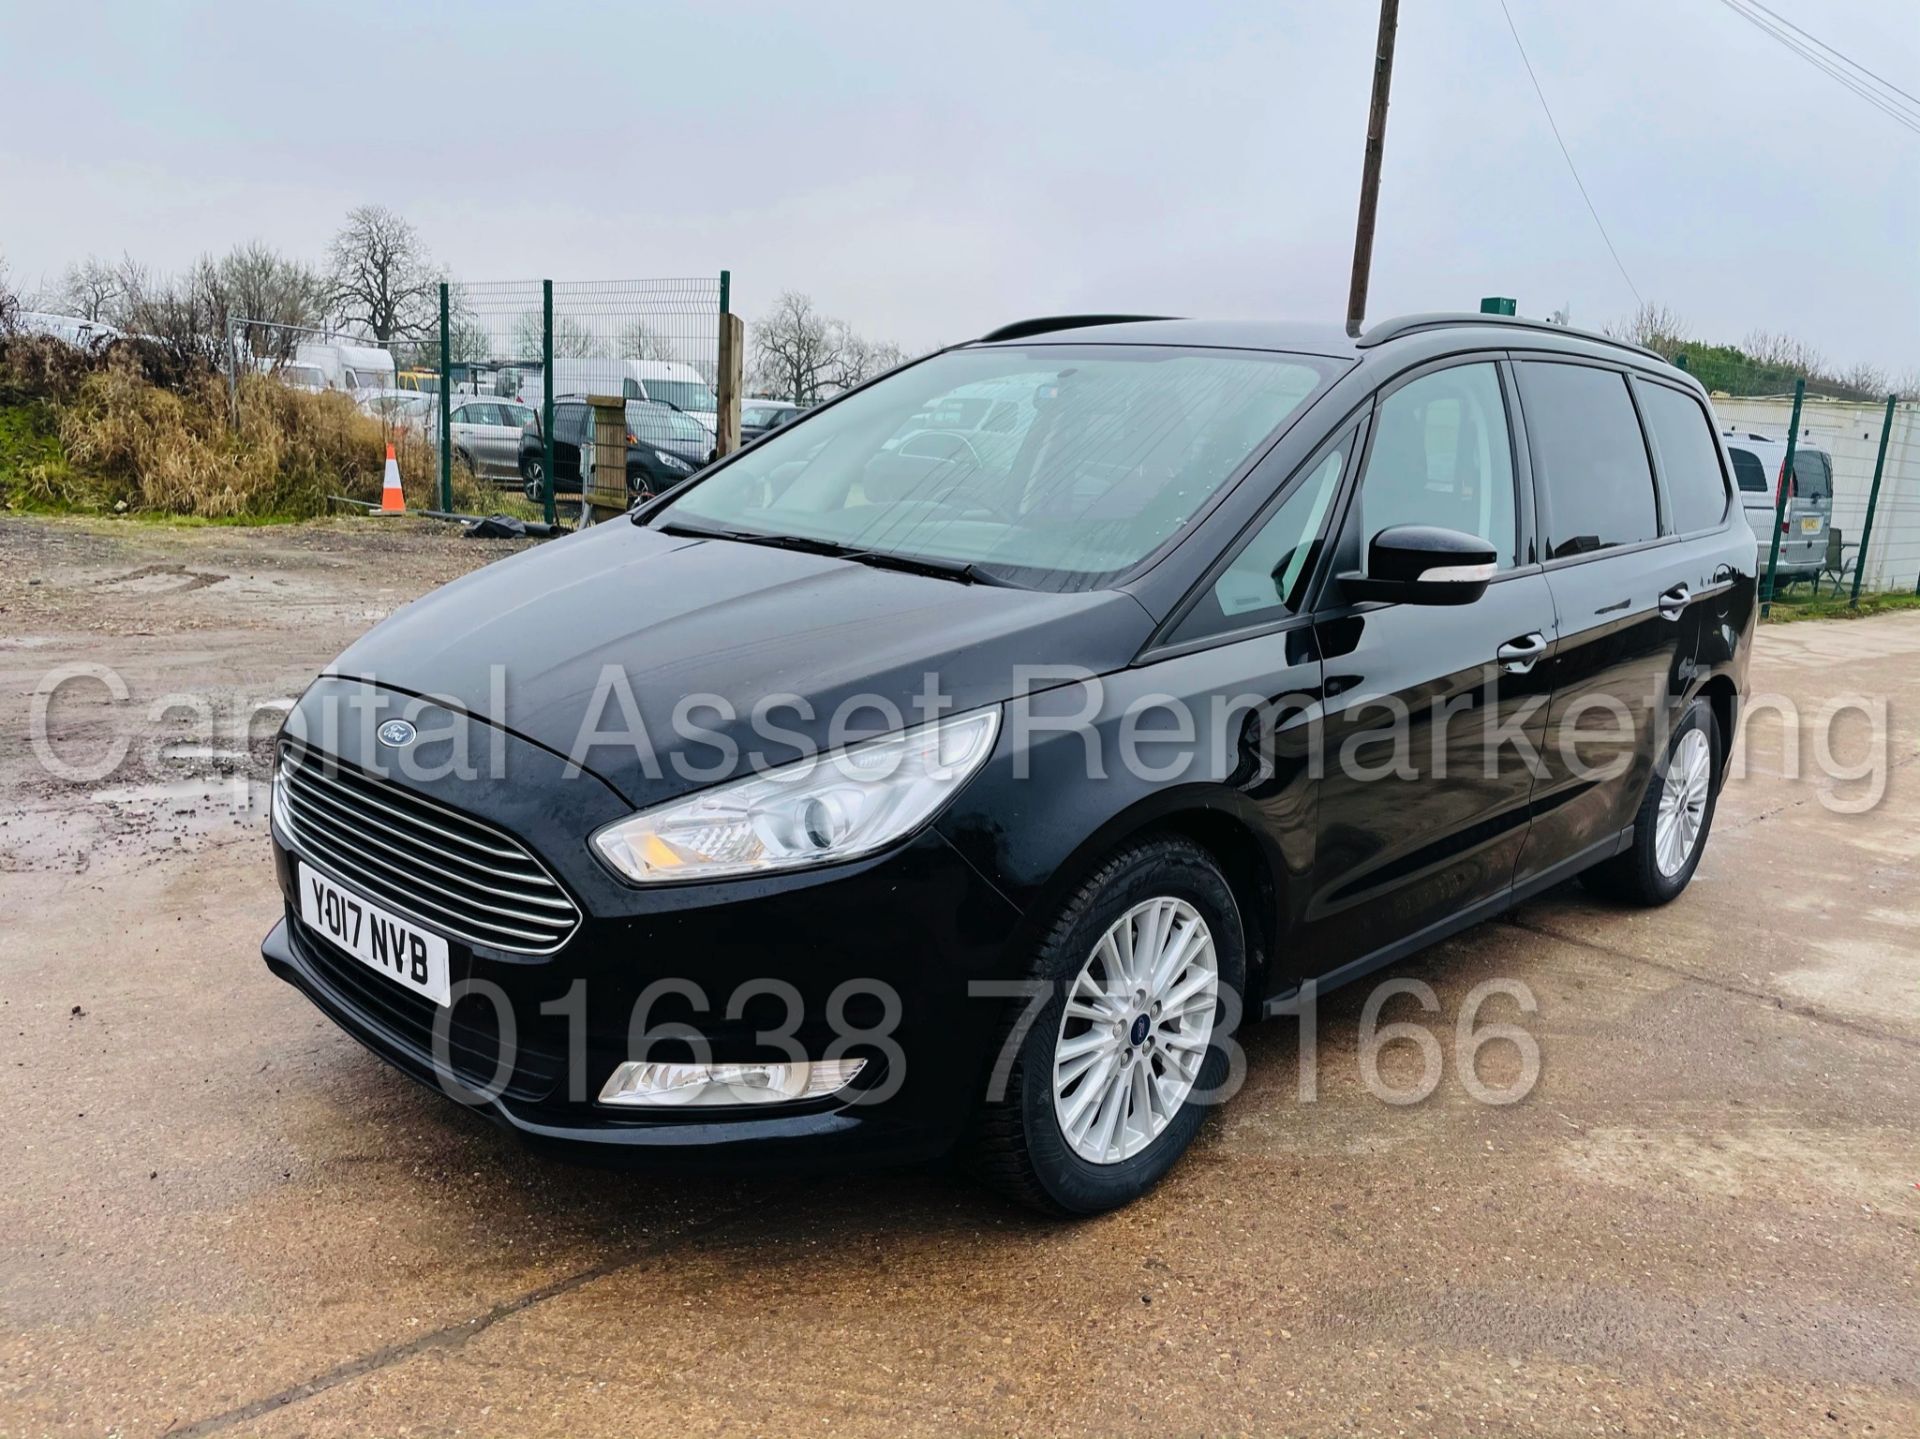 ON SALE FORD GALAXY *ZETEC EDITION* 7 SEATER MPV (2017 - EURO 6) '2.0 TDCI - AUTO' (- FULL HISTORY) - Image 5 of 48